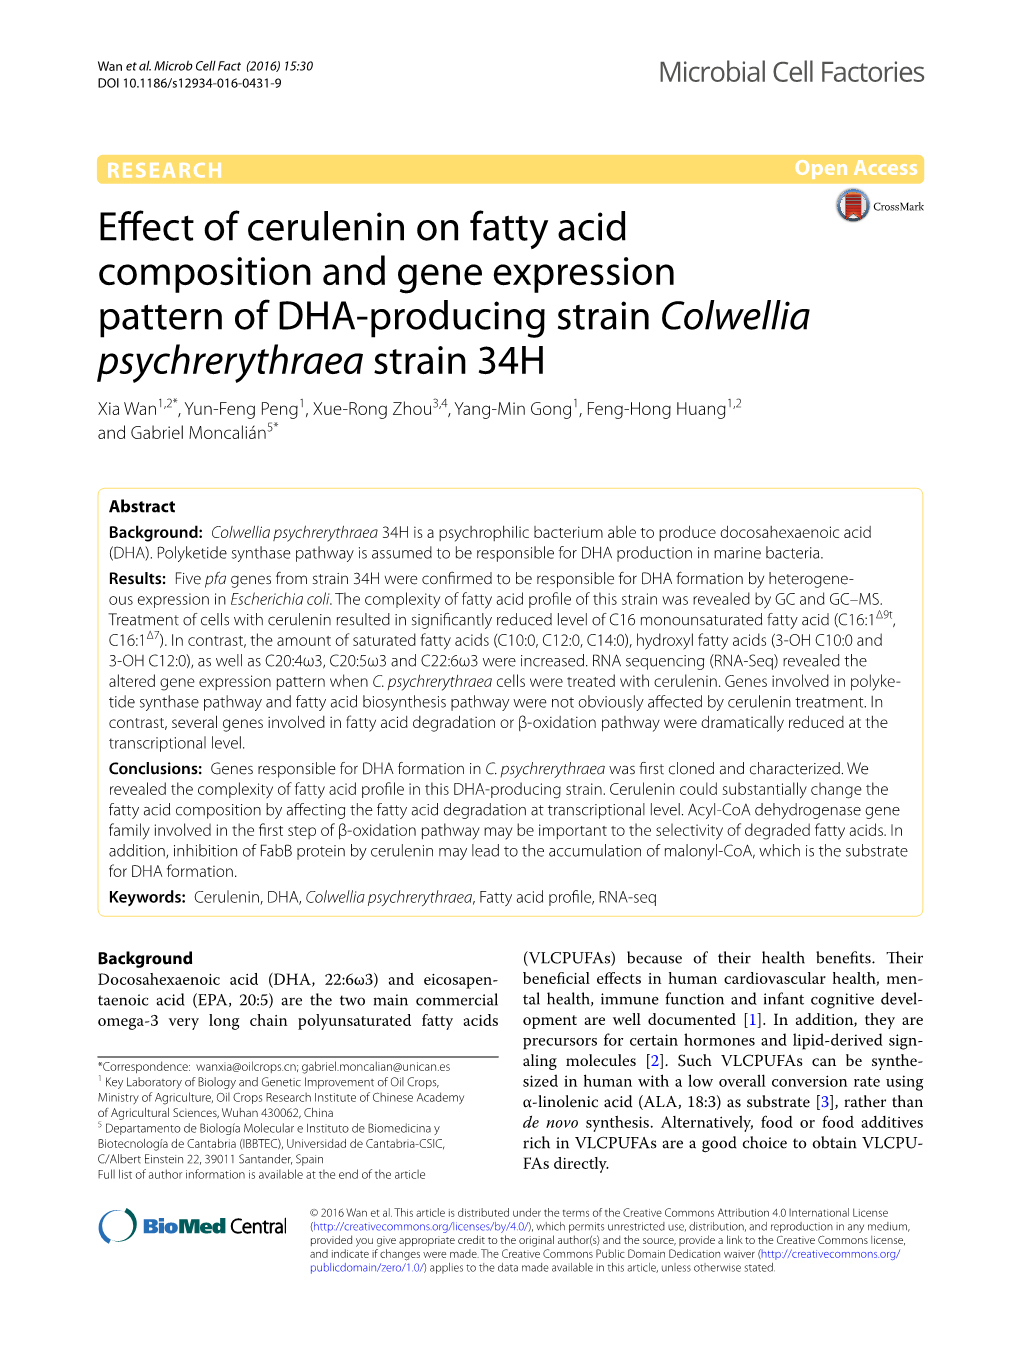 Effect of Cerulenin on Fatty Acid Composition and Gene Expression